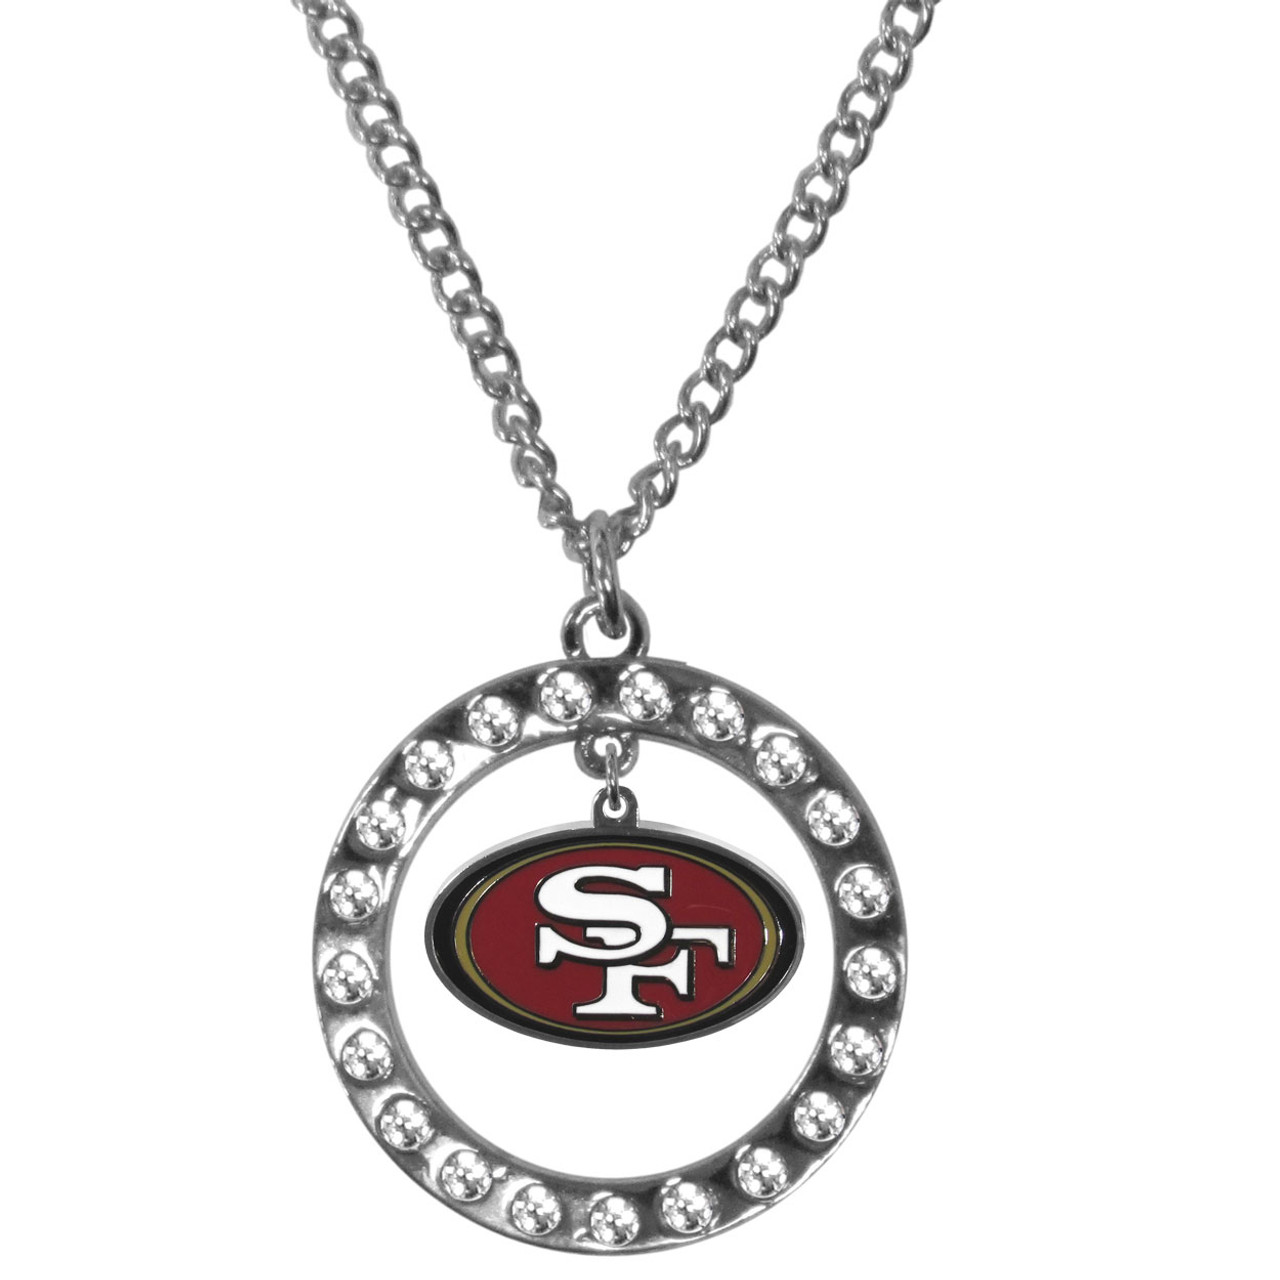 The Story Behind Deebo Samuel and the 49ers Viral Iced Out Chain